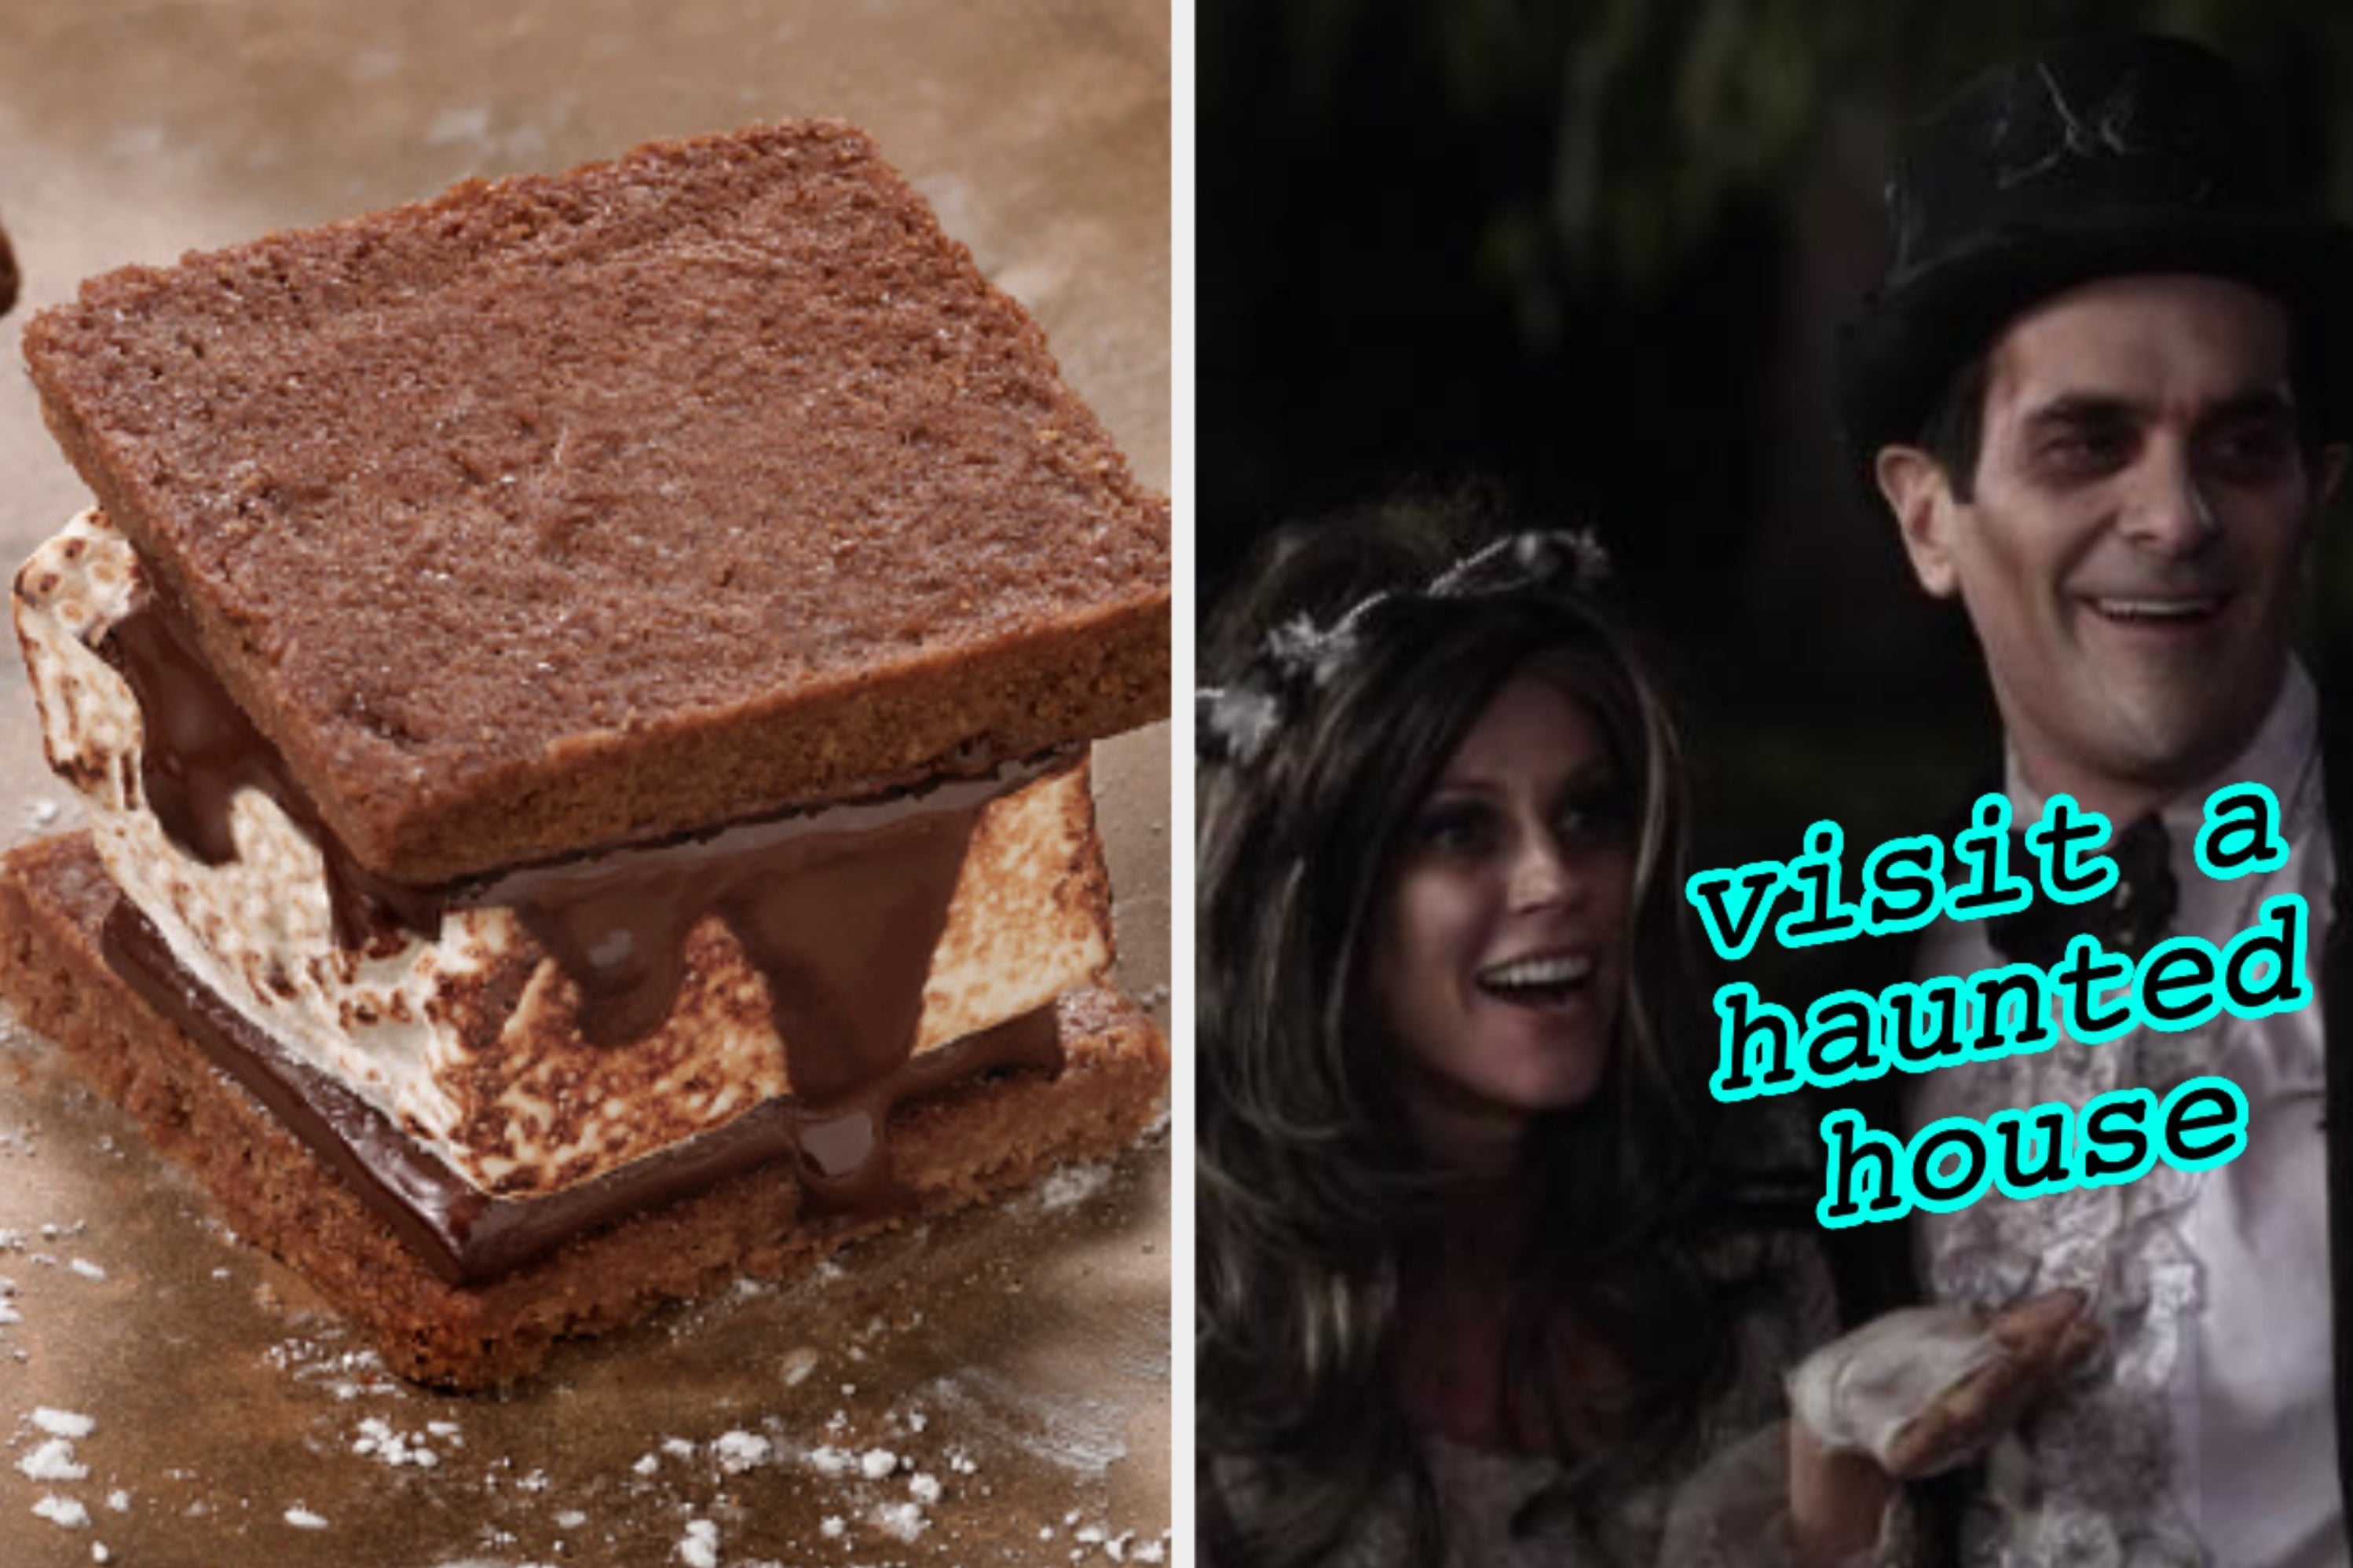 On the left, a homemade s&#x27;more made with chocolate cookies, and on the right, Claire and Phil from Modern Family dressed as a Corpse Bride and Groom with visit a haunted house typed under their chins